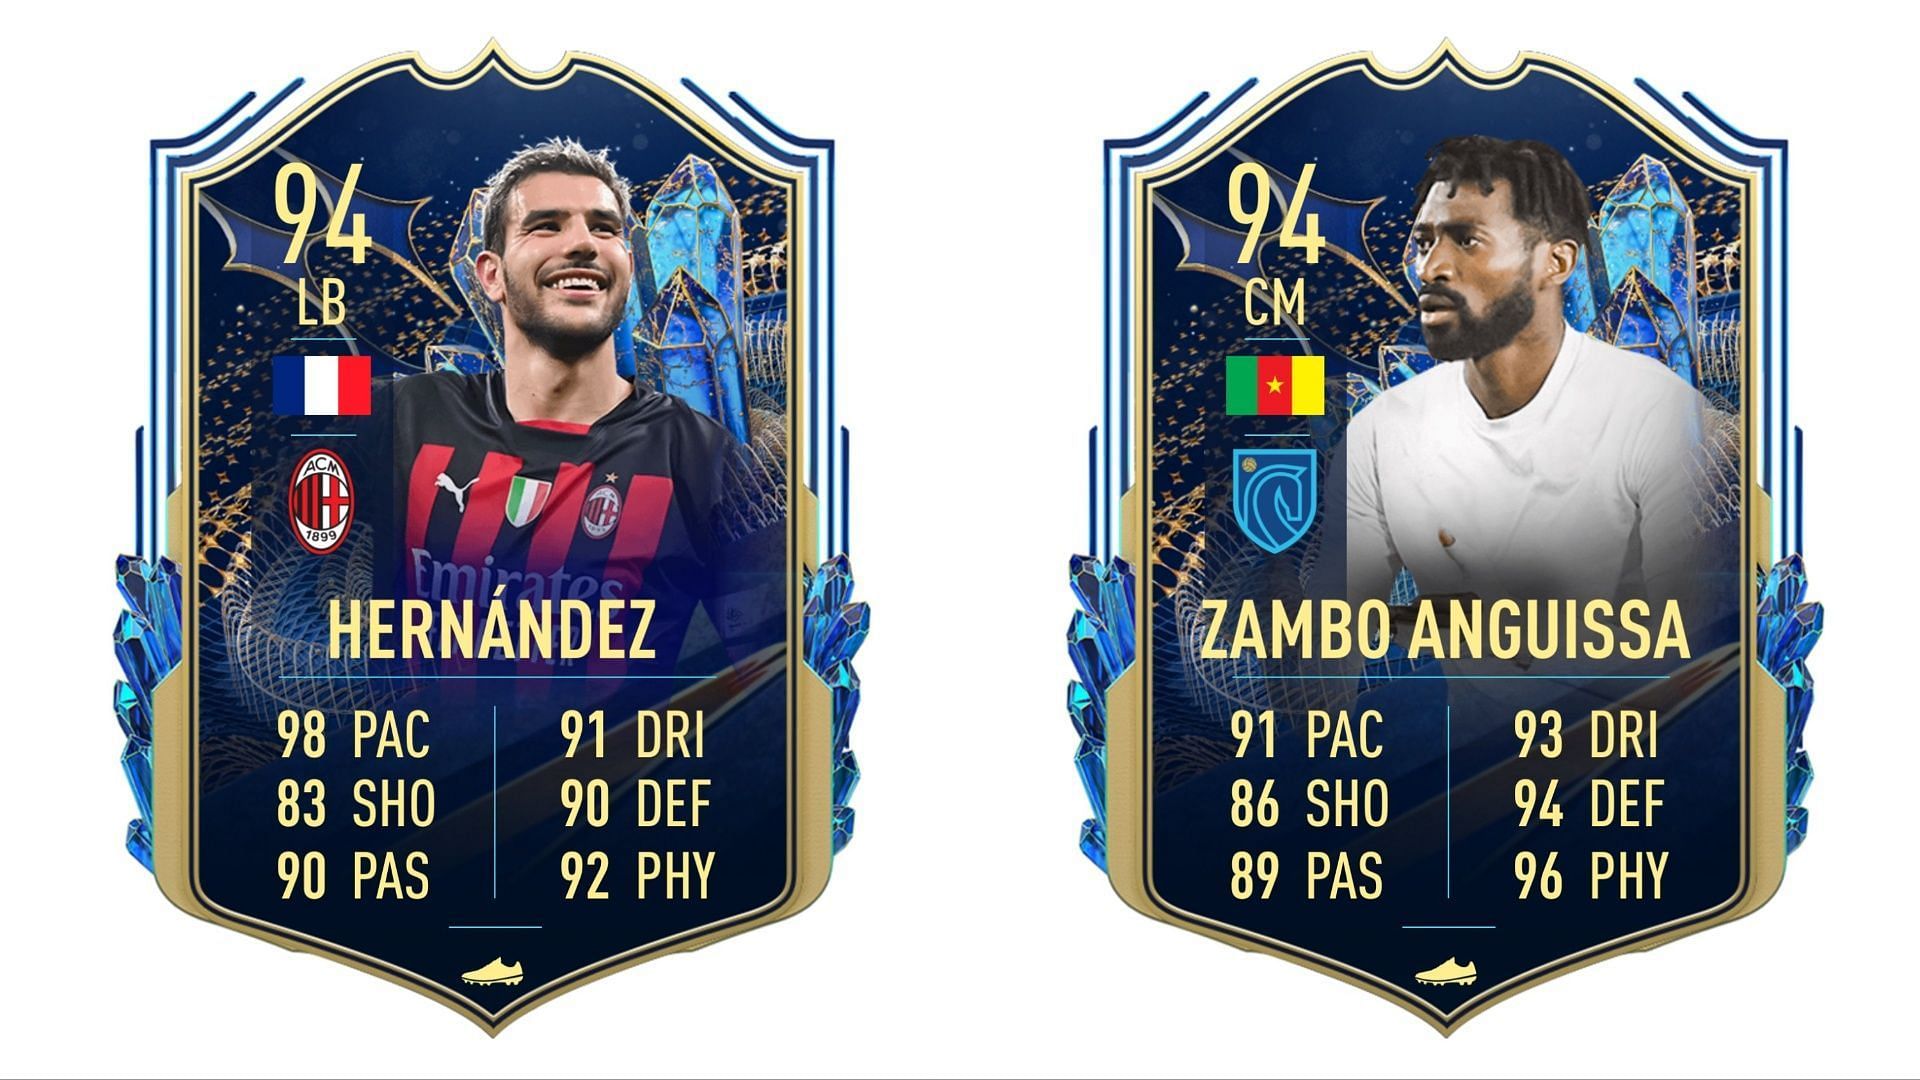 TOTS Theo and Zambo Anguissa have been leaked (Images via Twitter/FIFA23Leaked_)